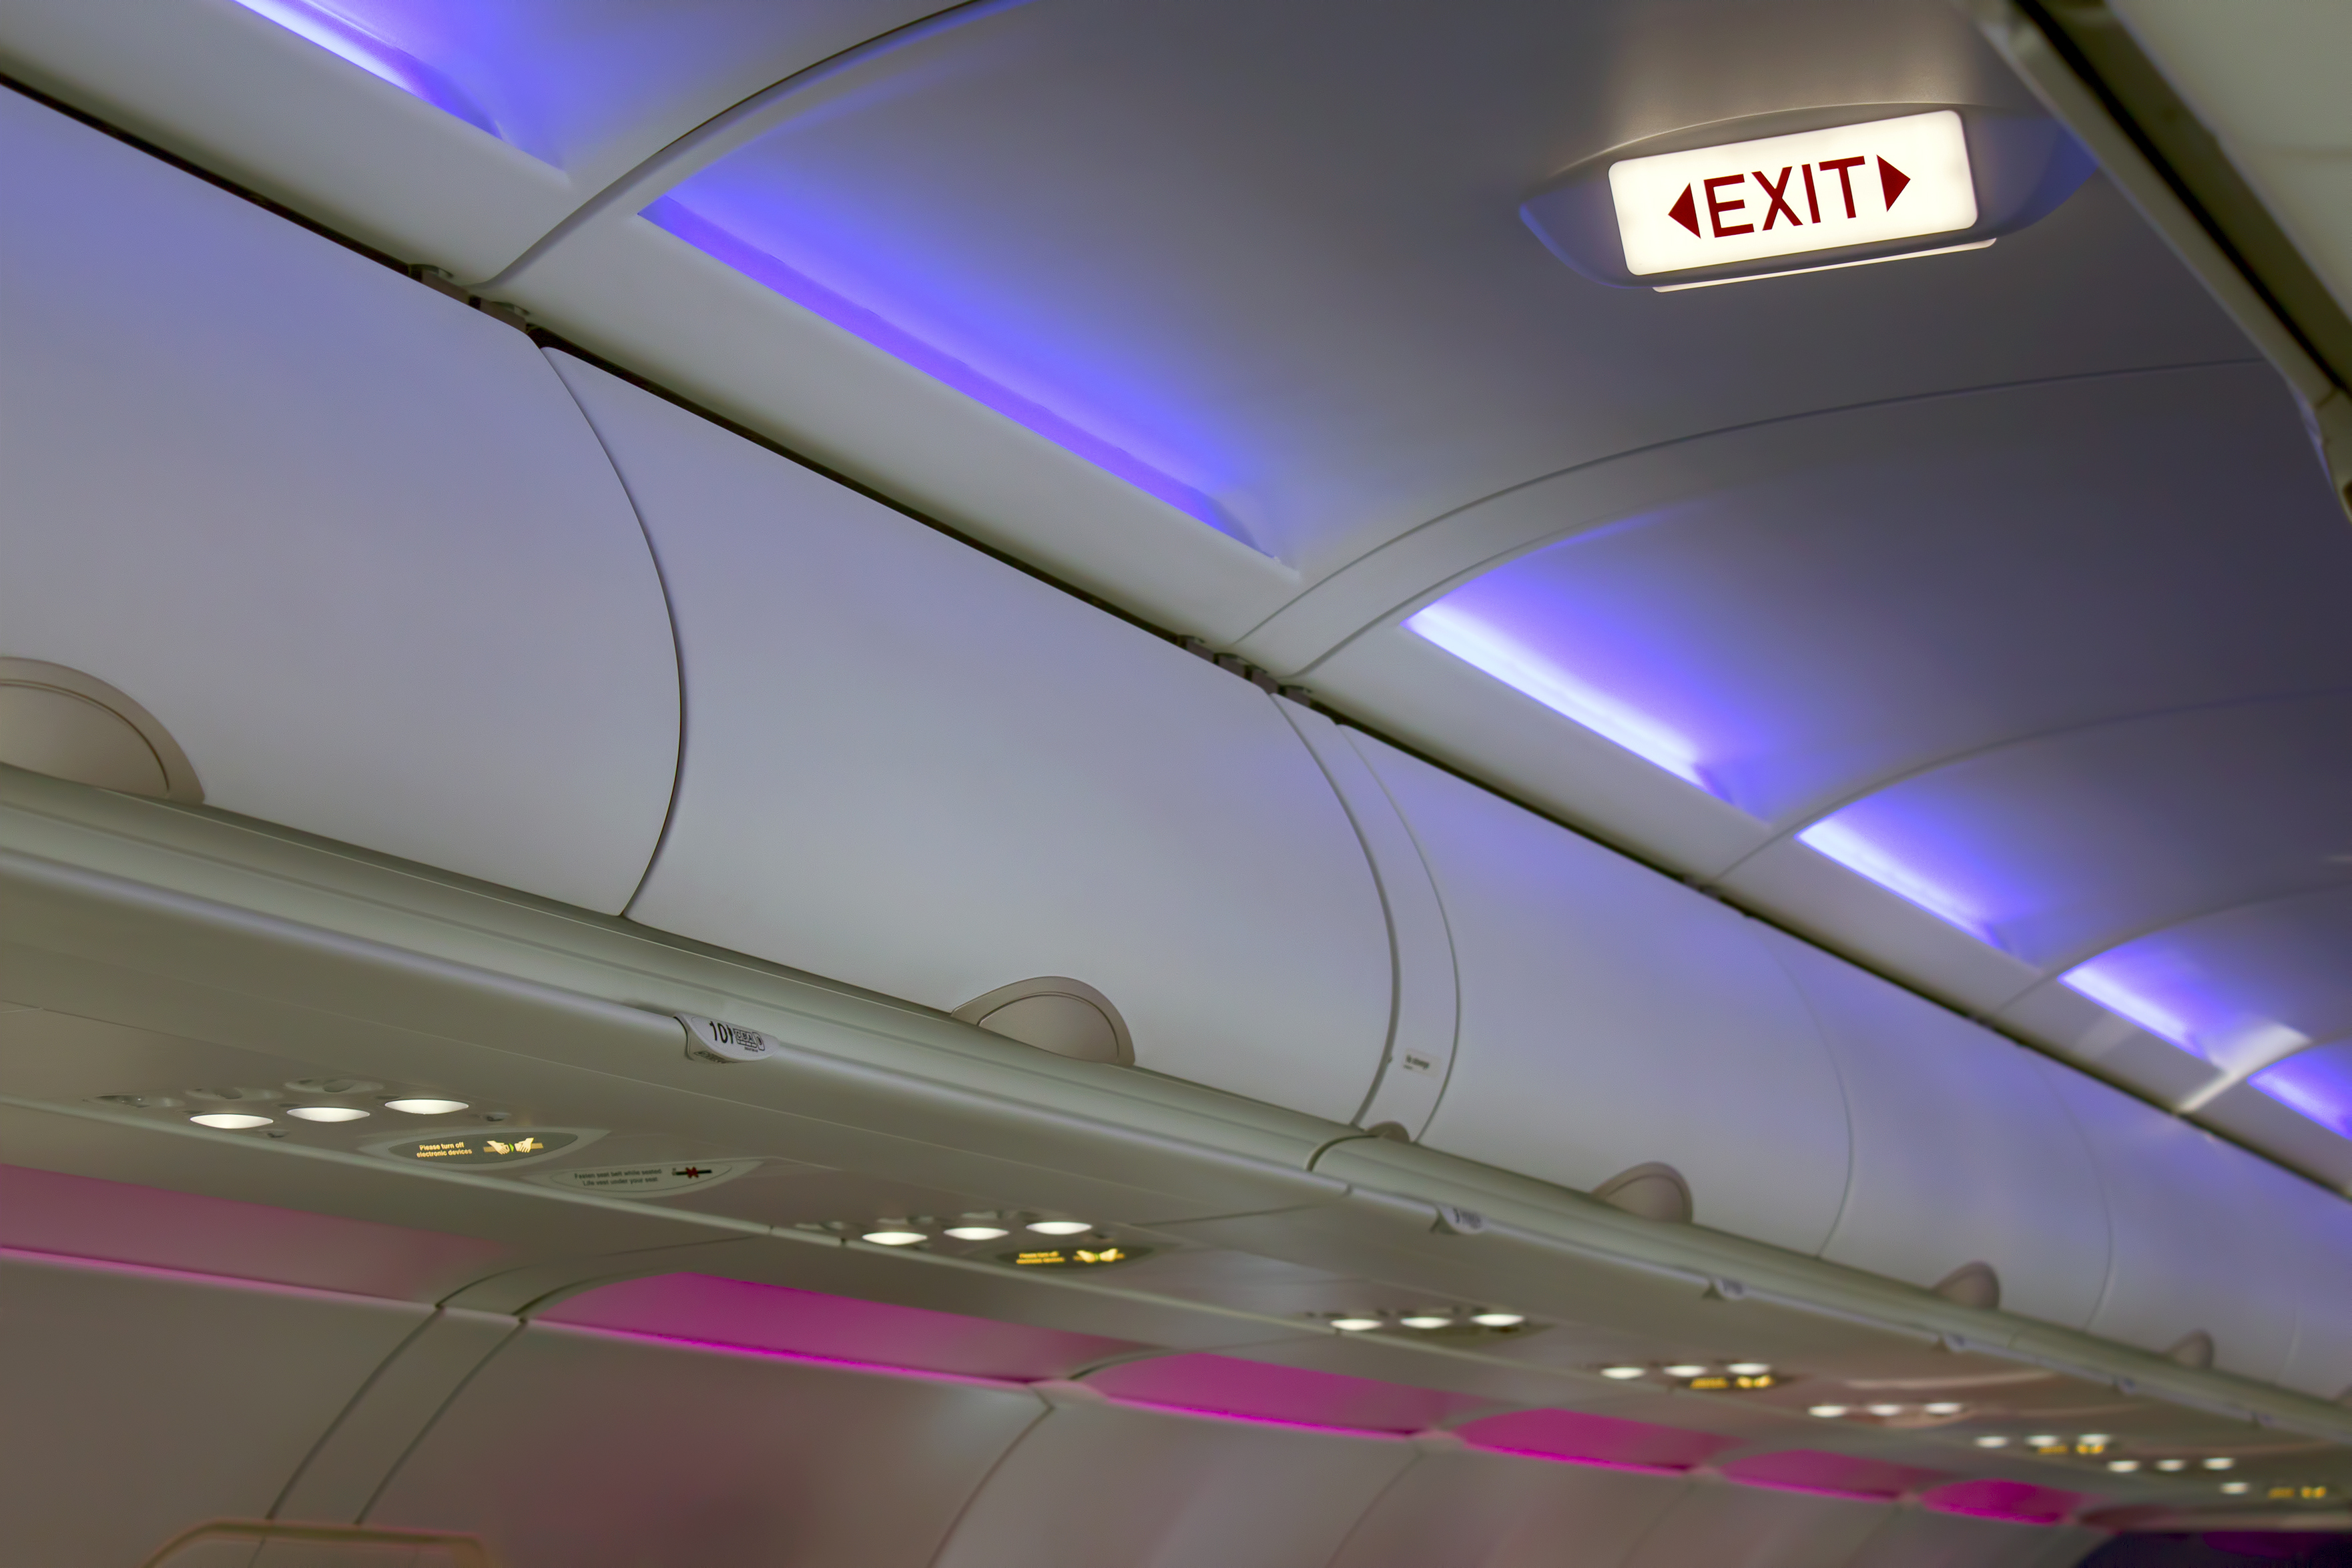 Airplane interior lighting and signs